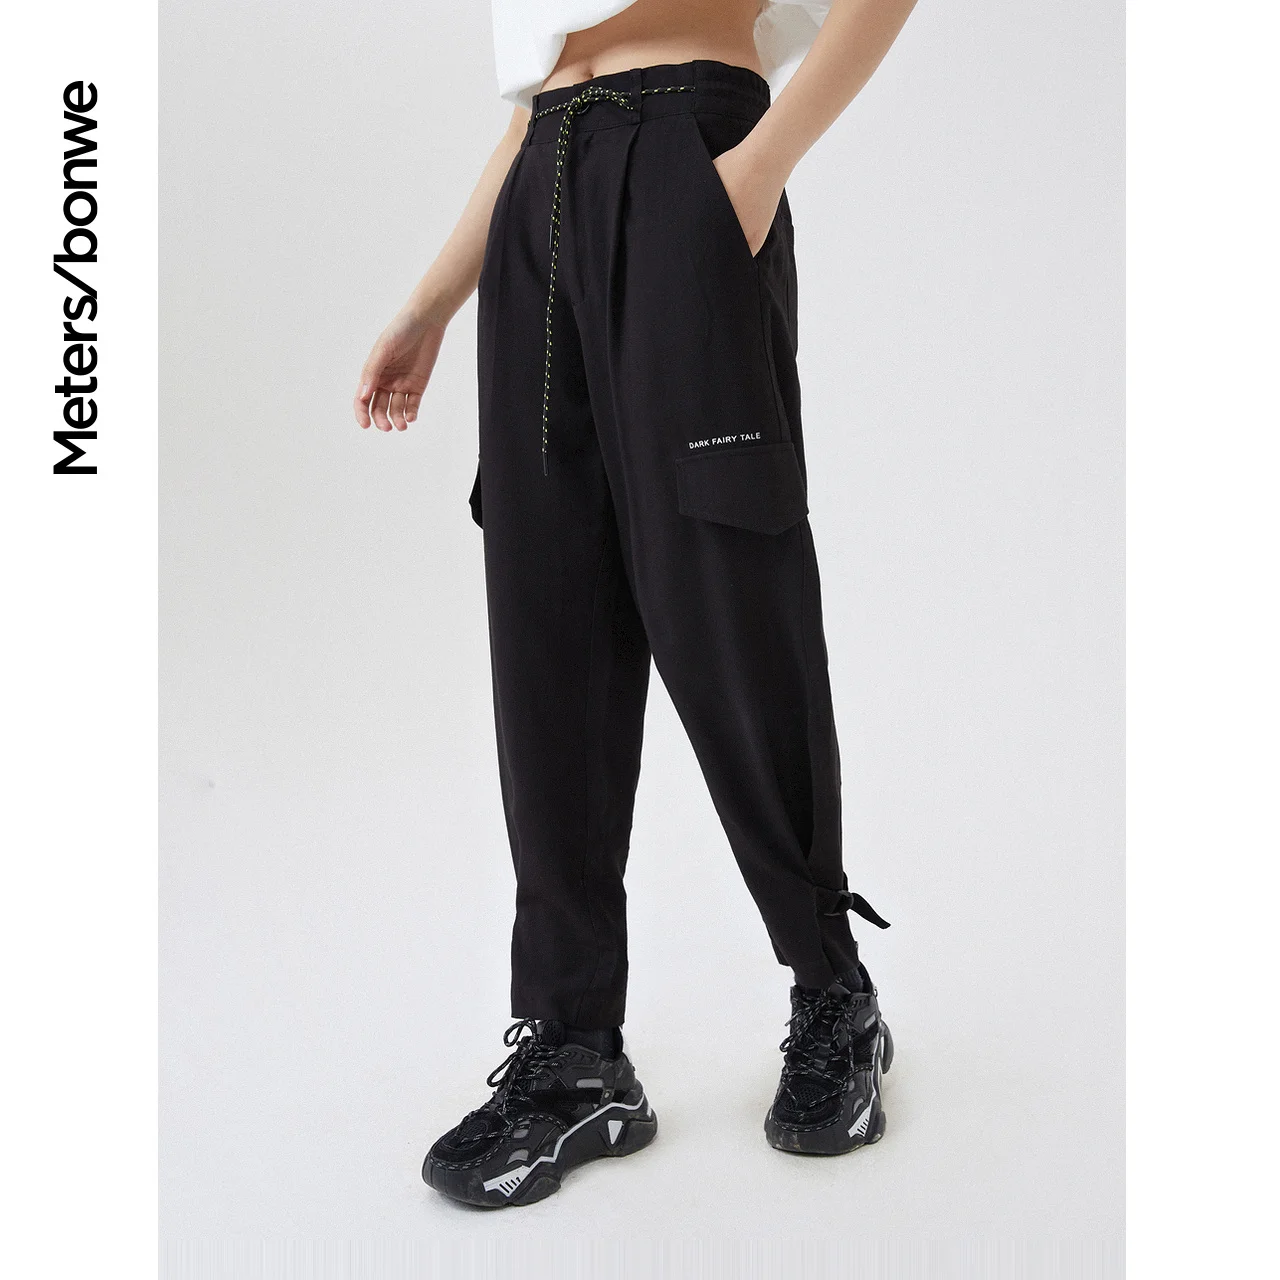 Metersbonwe Casual Pants Women Summer Fashion Youth Pants Comfortable Overalls Ladies Casual Trousers